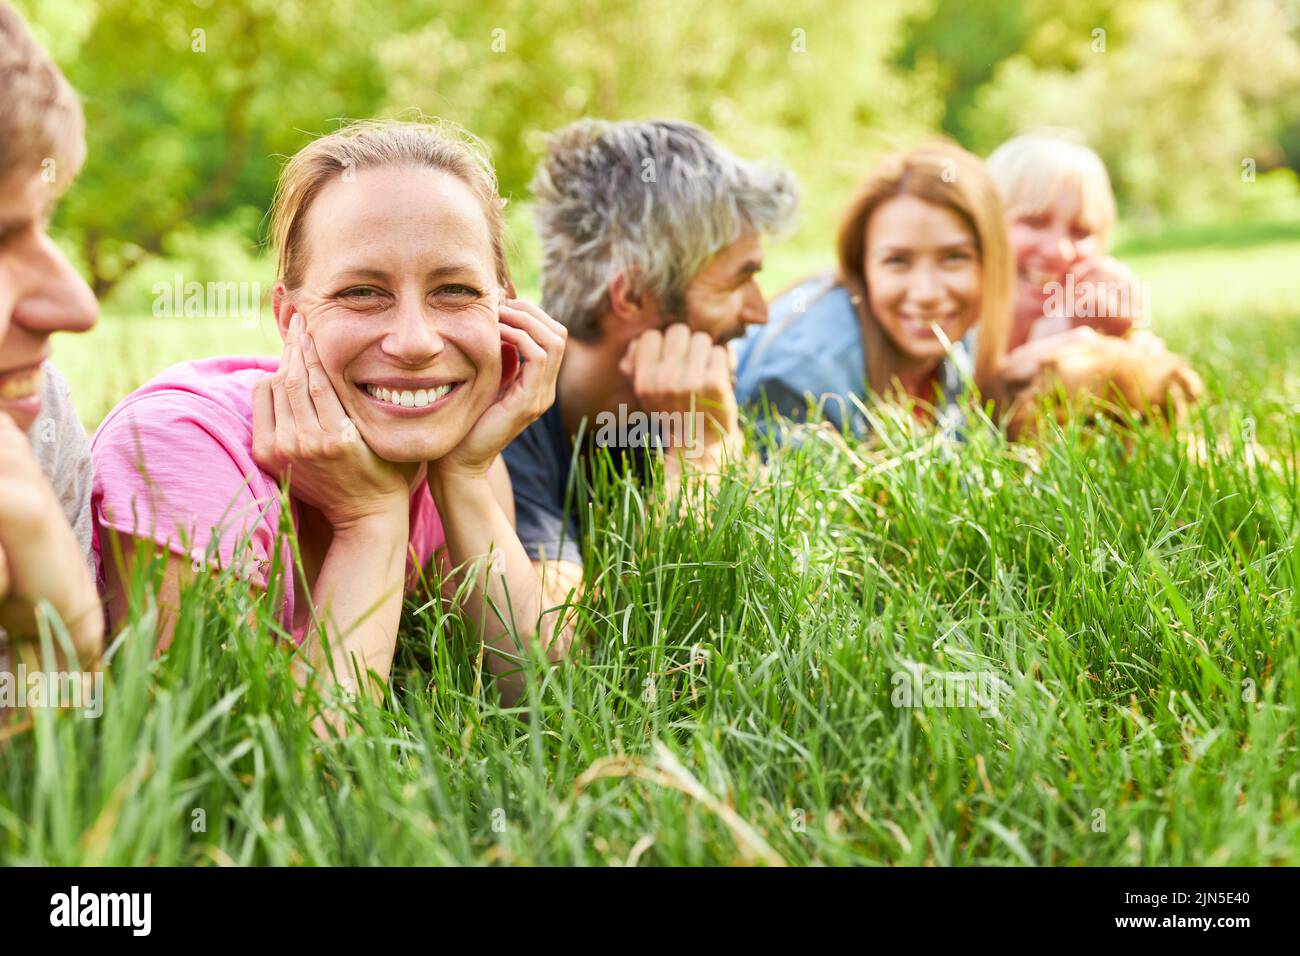 Happy young woman relaxing together with friends in the grass on a summer meadow Stock Photo